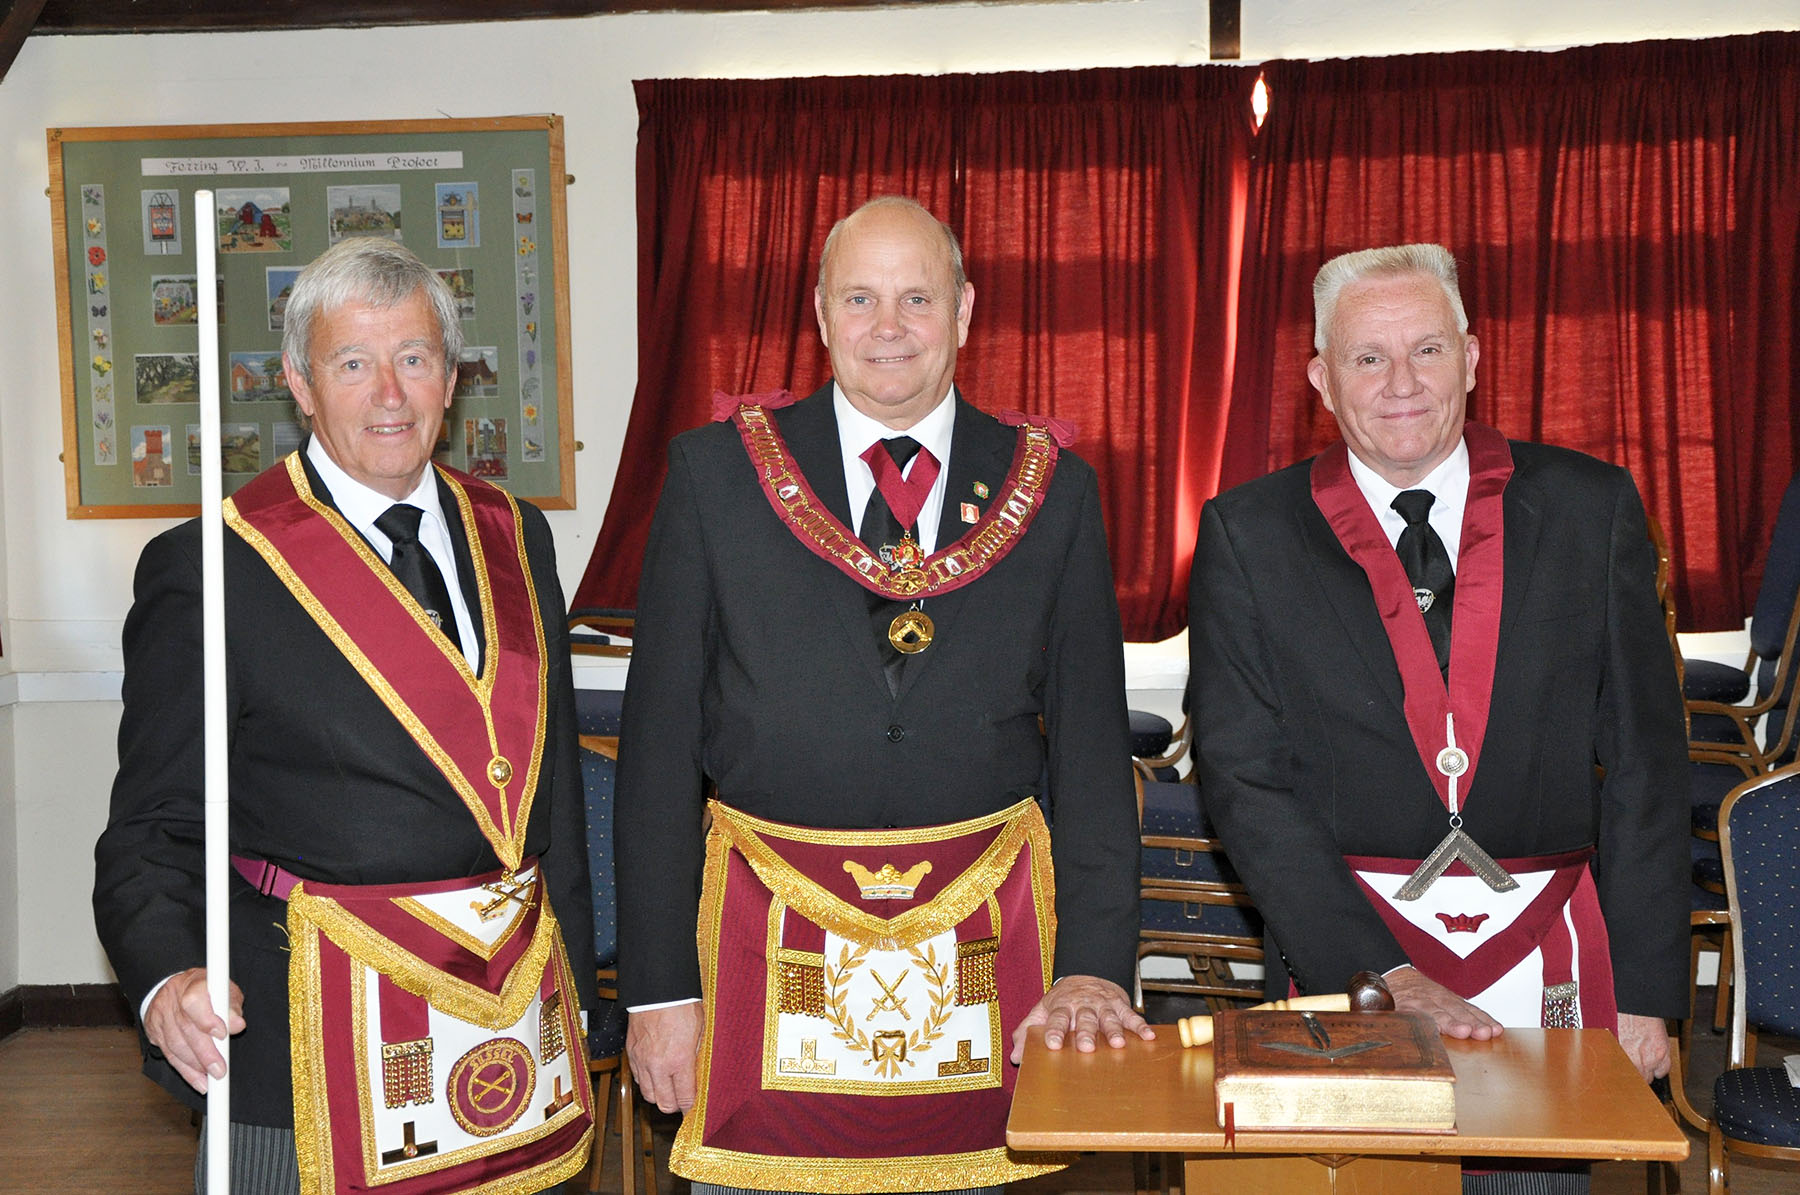 A Visit by the Deputy Provincial Grand Master to the Court of the South Saxons